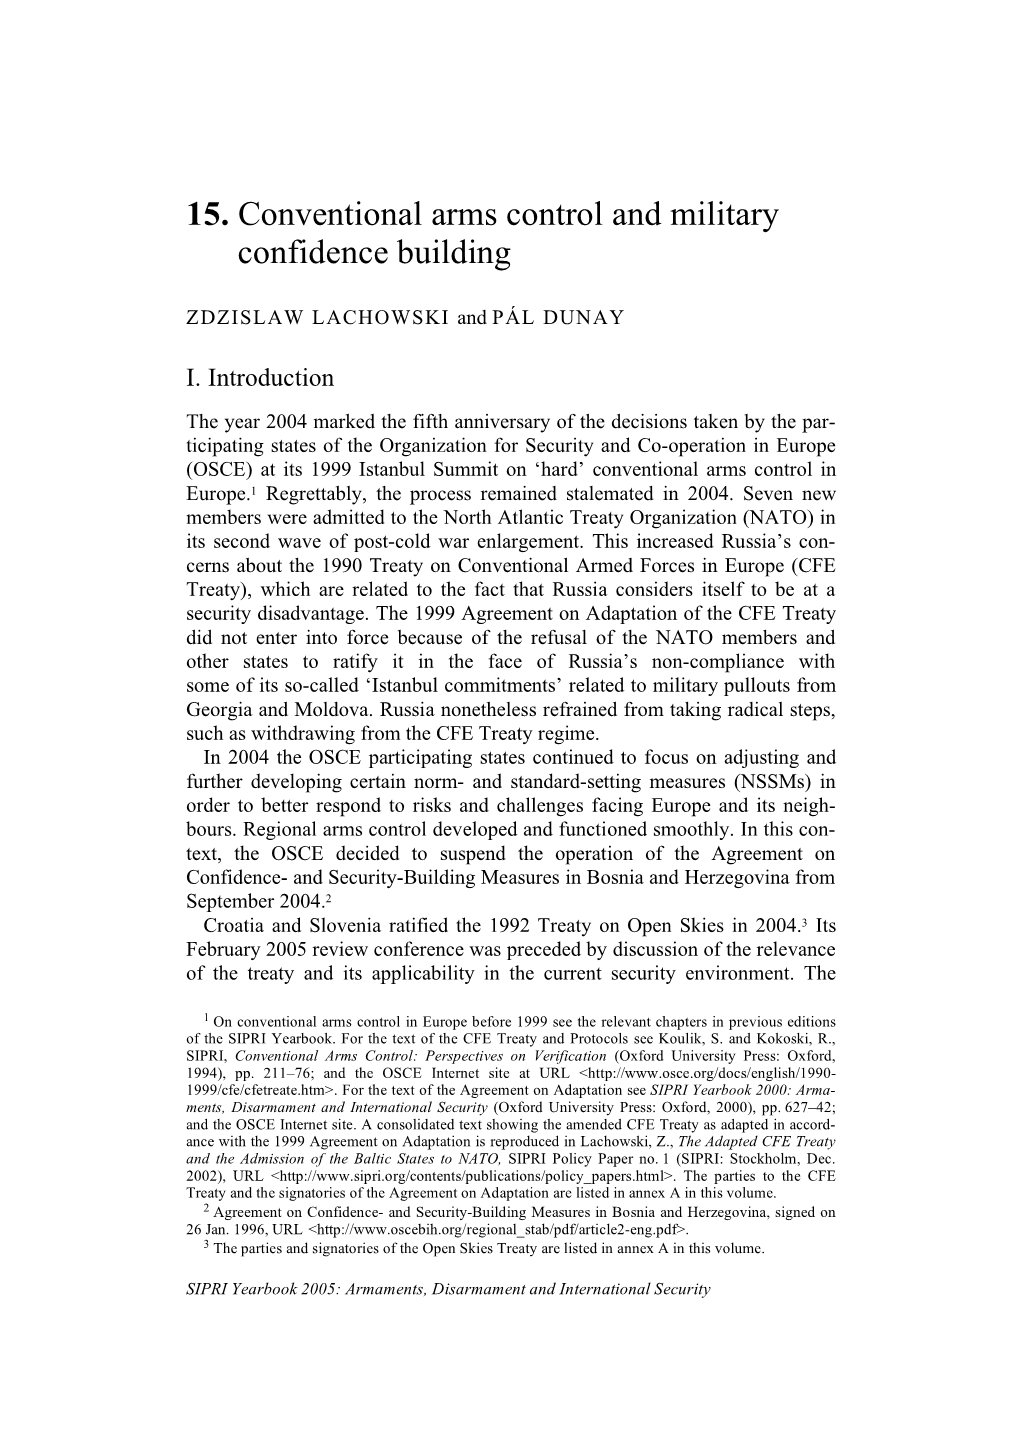 15. Conventional Arms Control and Military Confidence Building